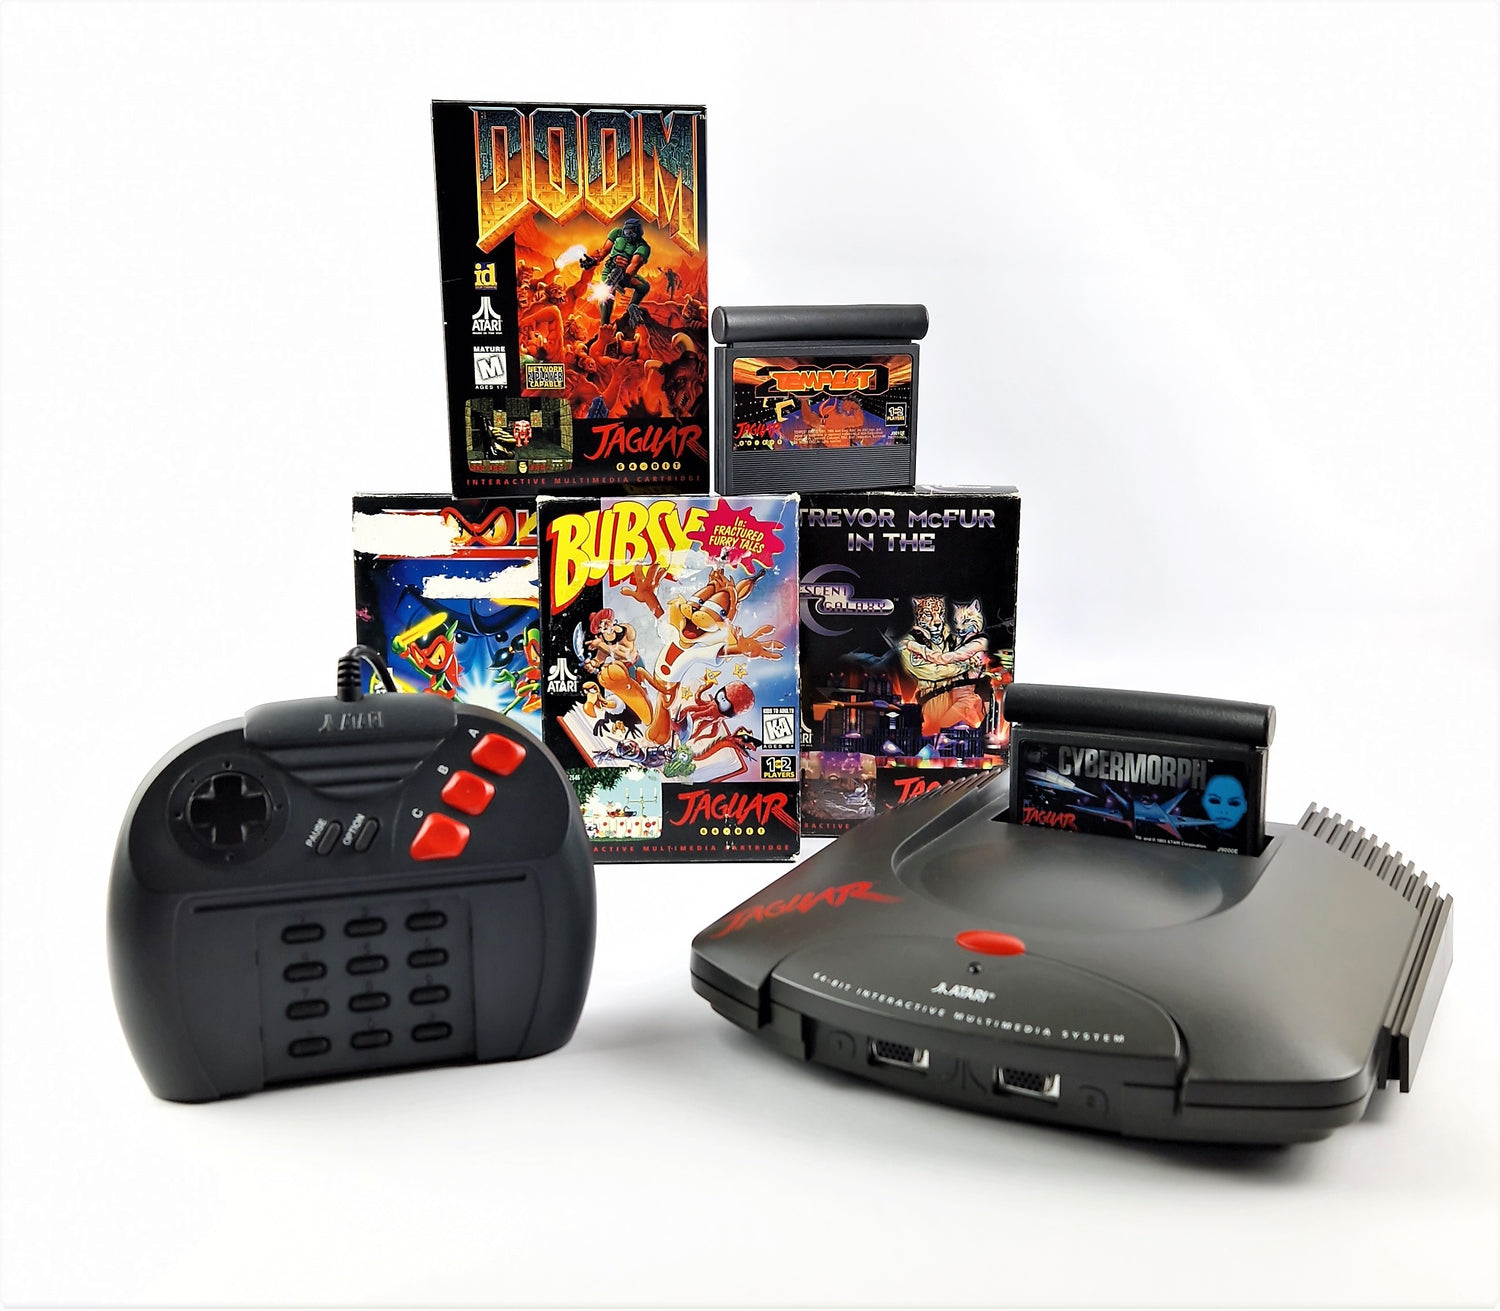 Atari Jaguar console with 1 controller, connection cable and 6 games - Doom OVP PAL